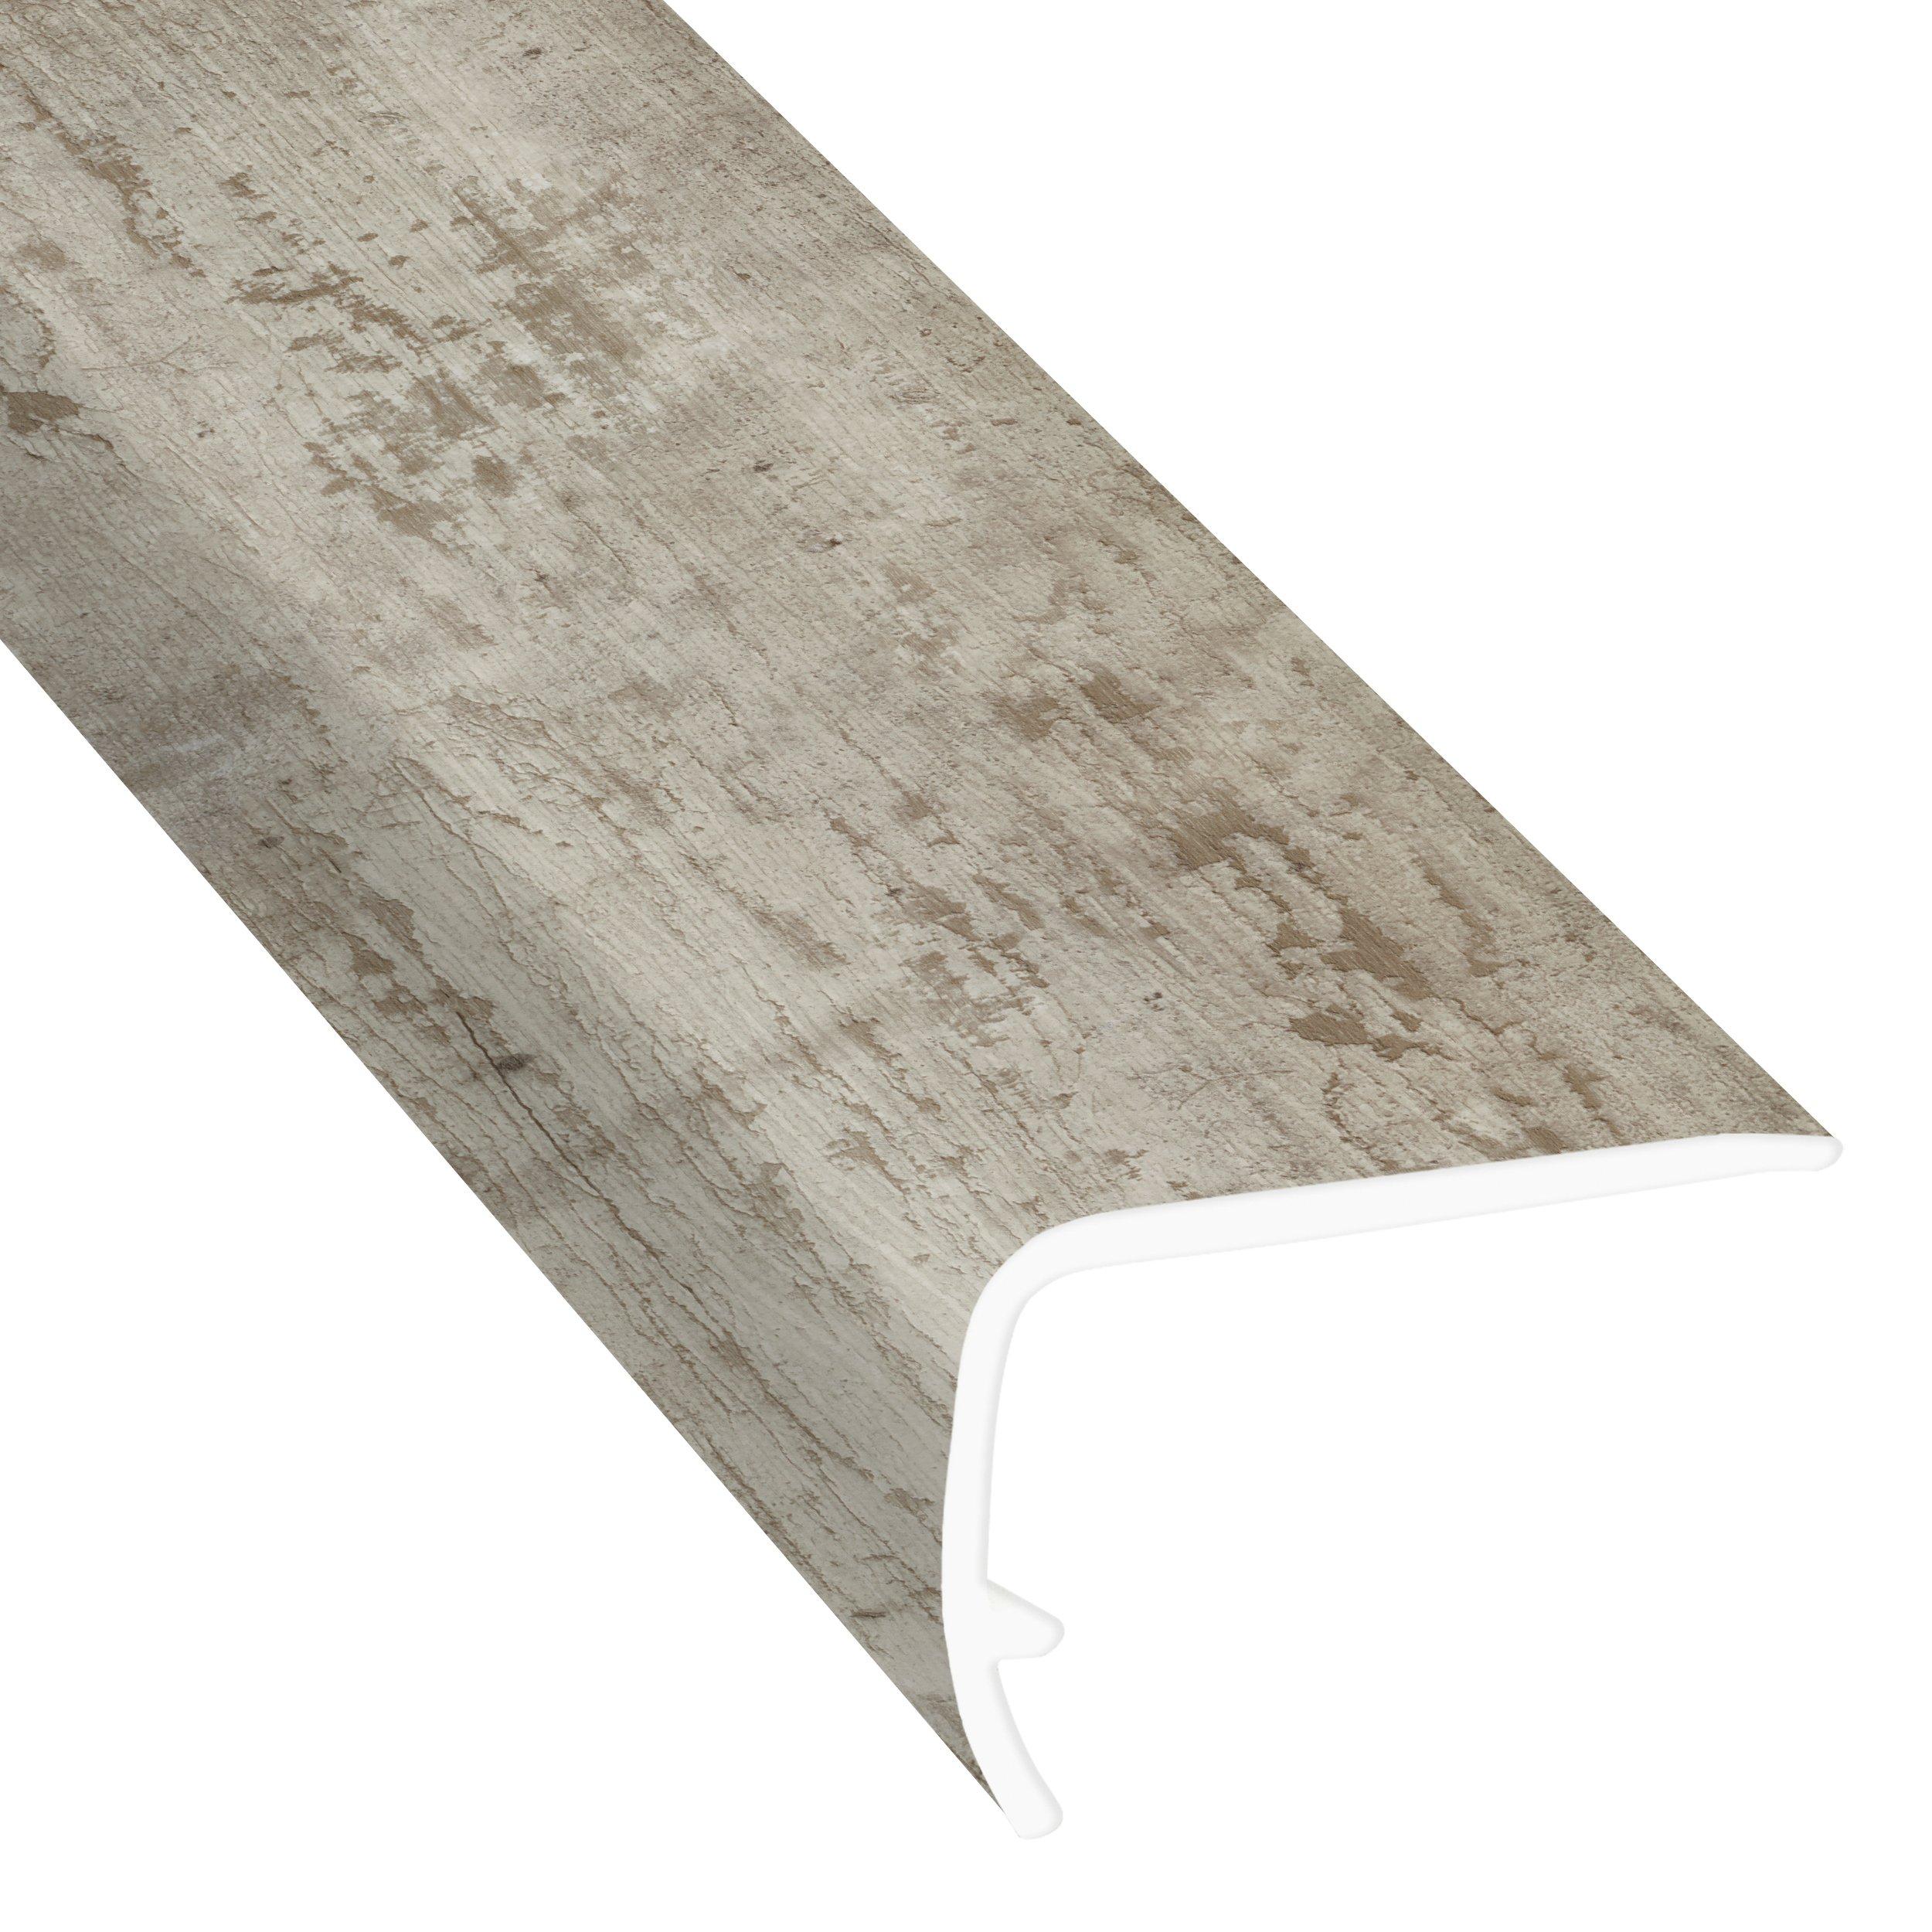 Wilmington Sky 94in. Vinyl Overlapping Stair Nose